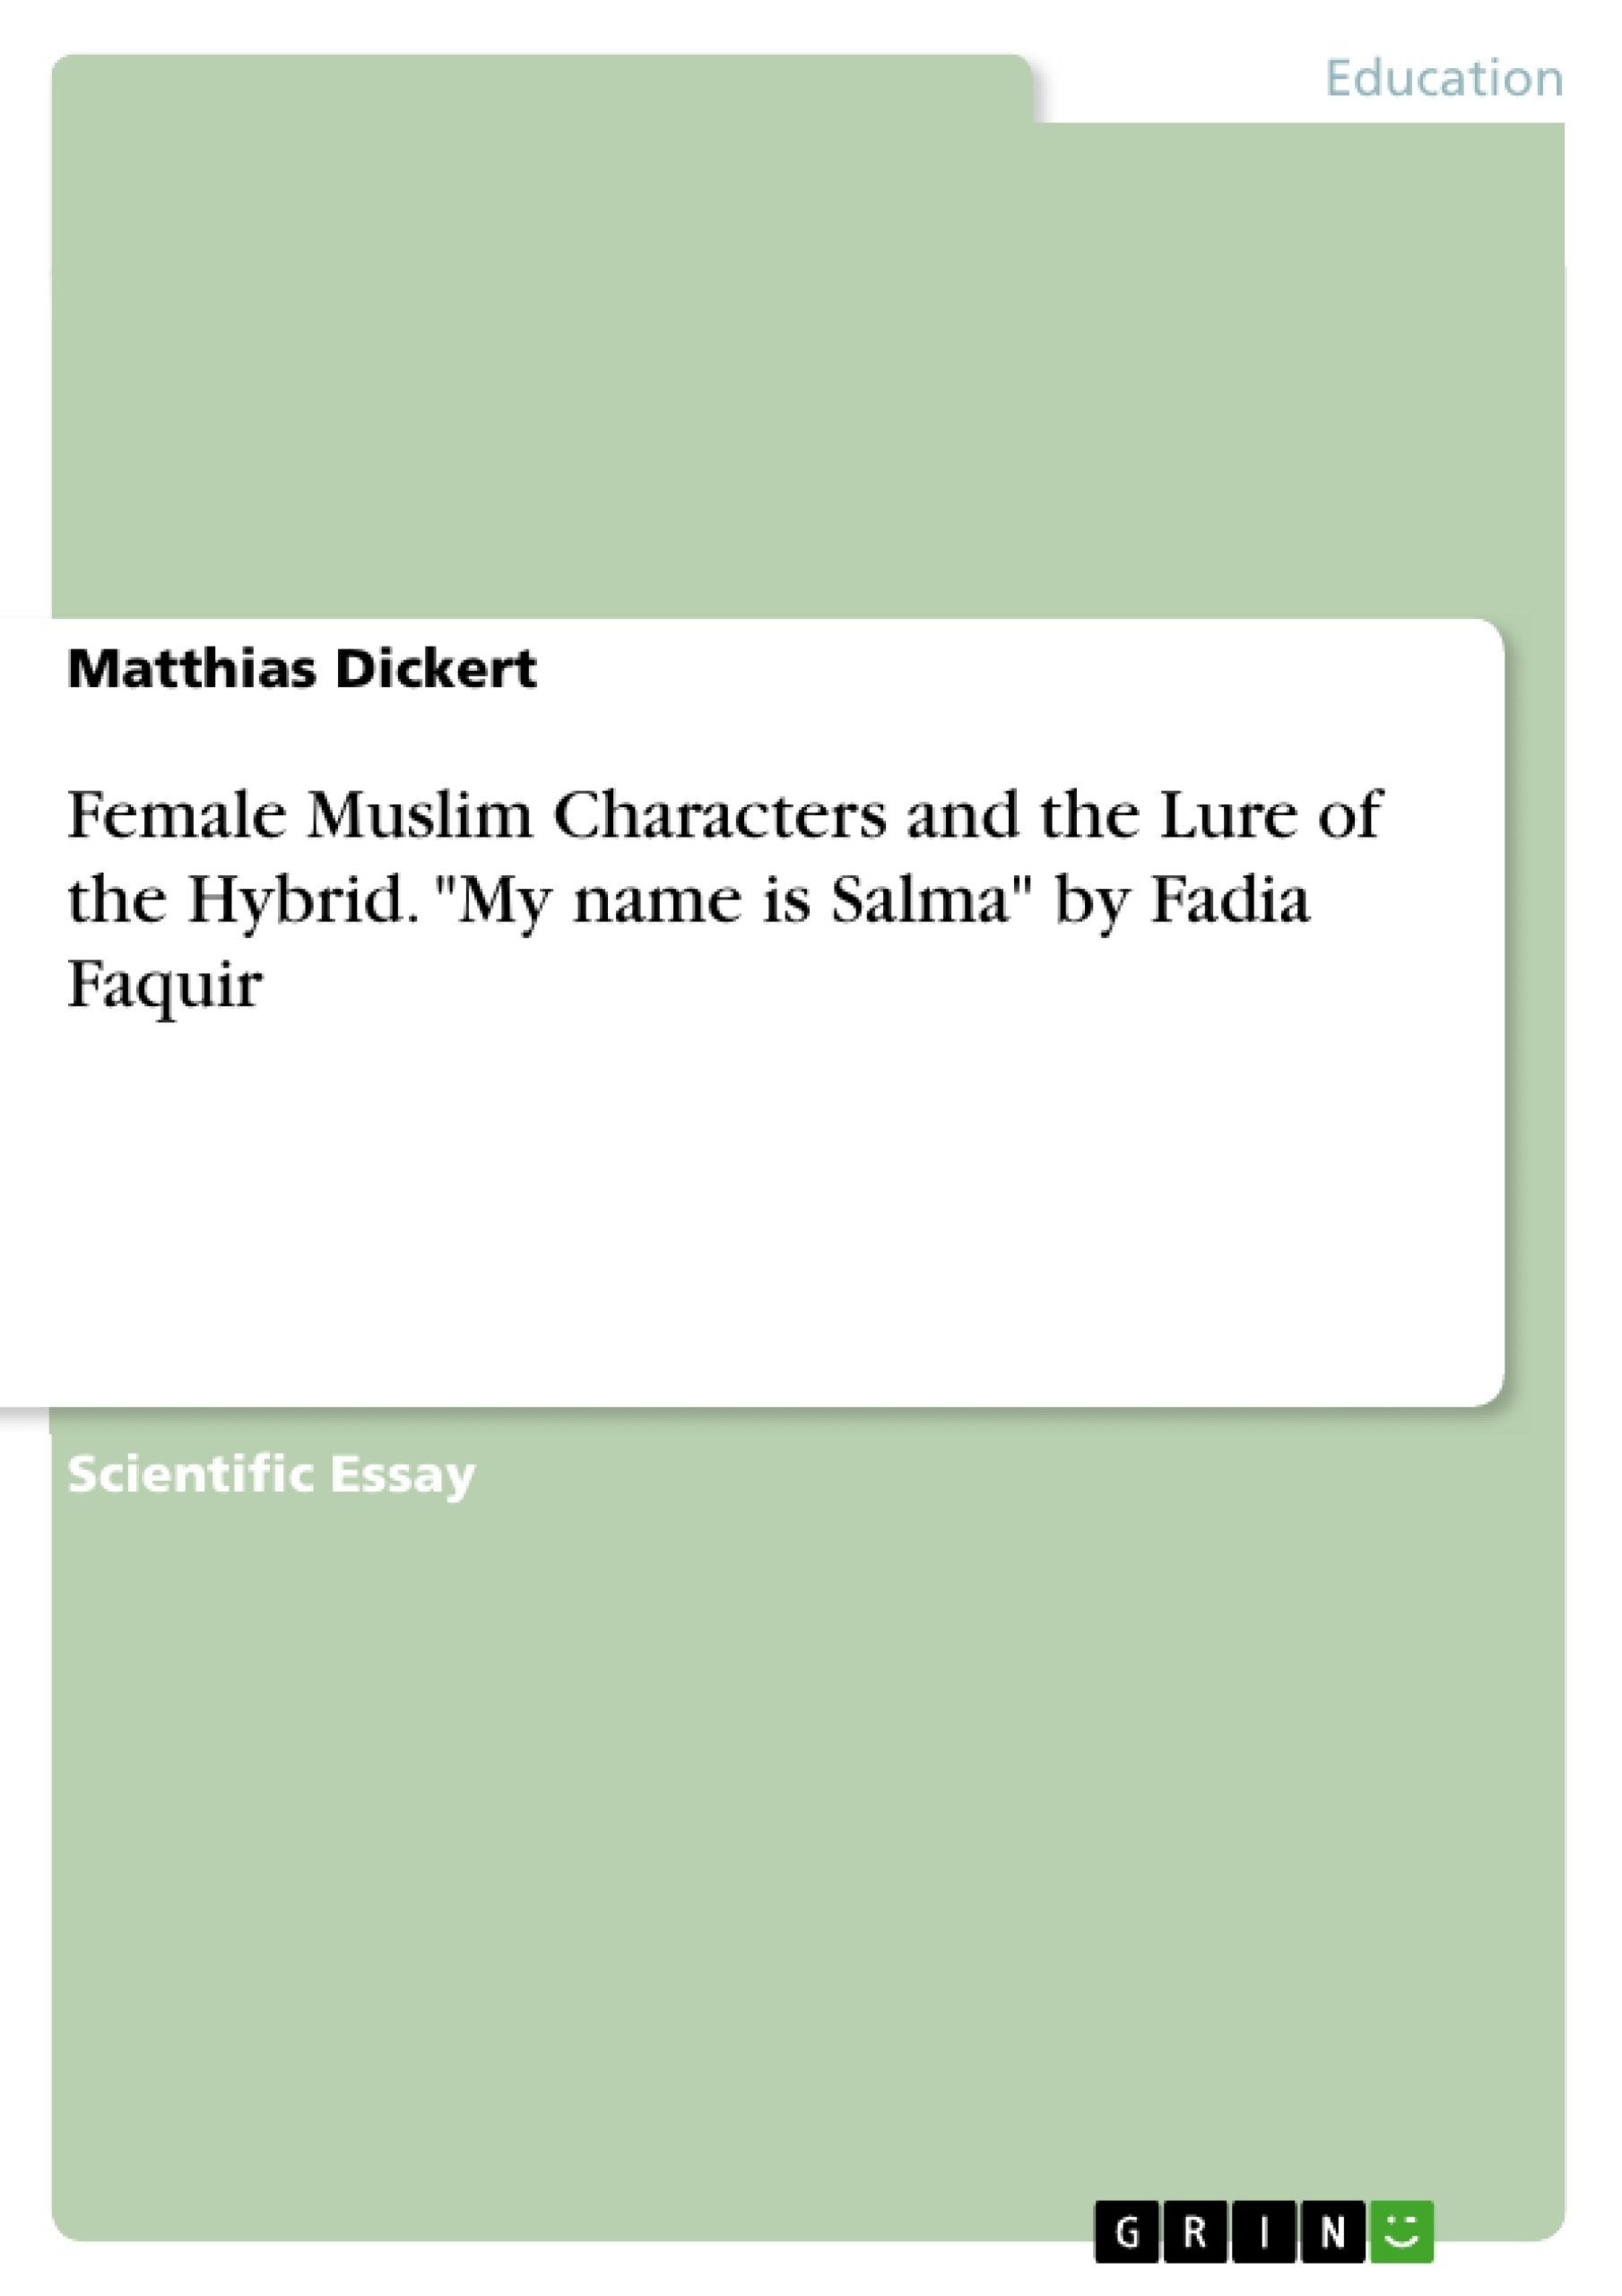 Titre: Female Muslim Characters and the Lure of the Hybrid. "My name is Salma" by Fadia Faquir